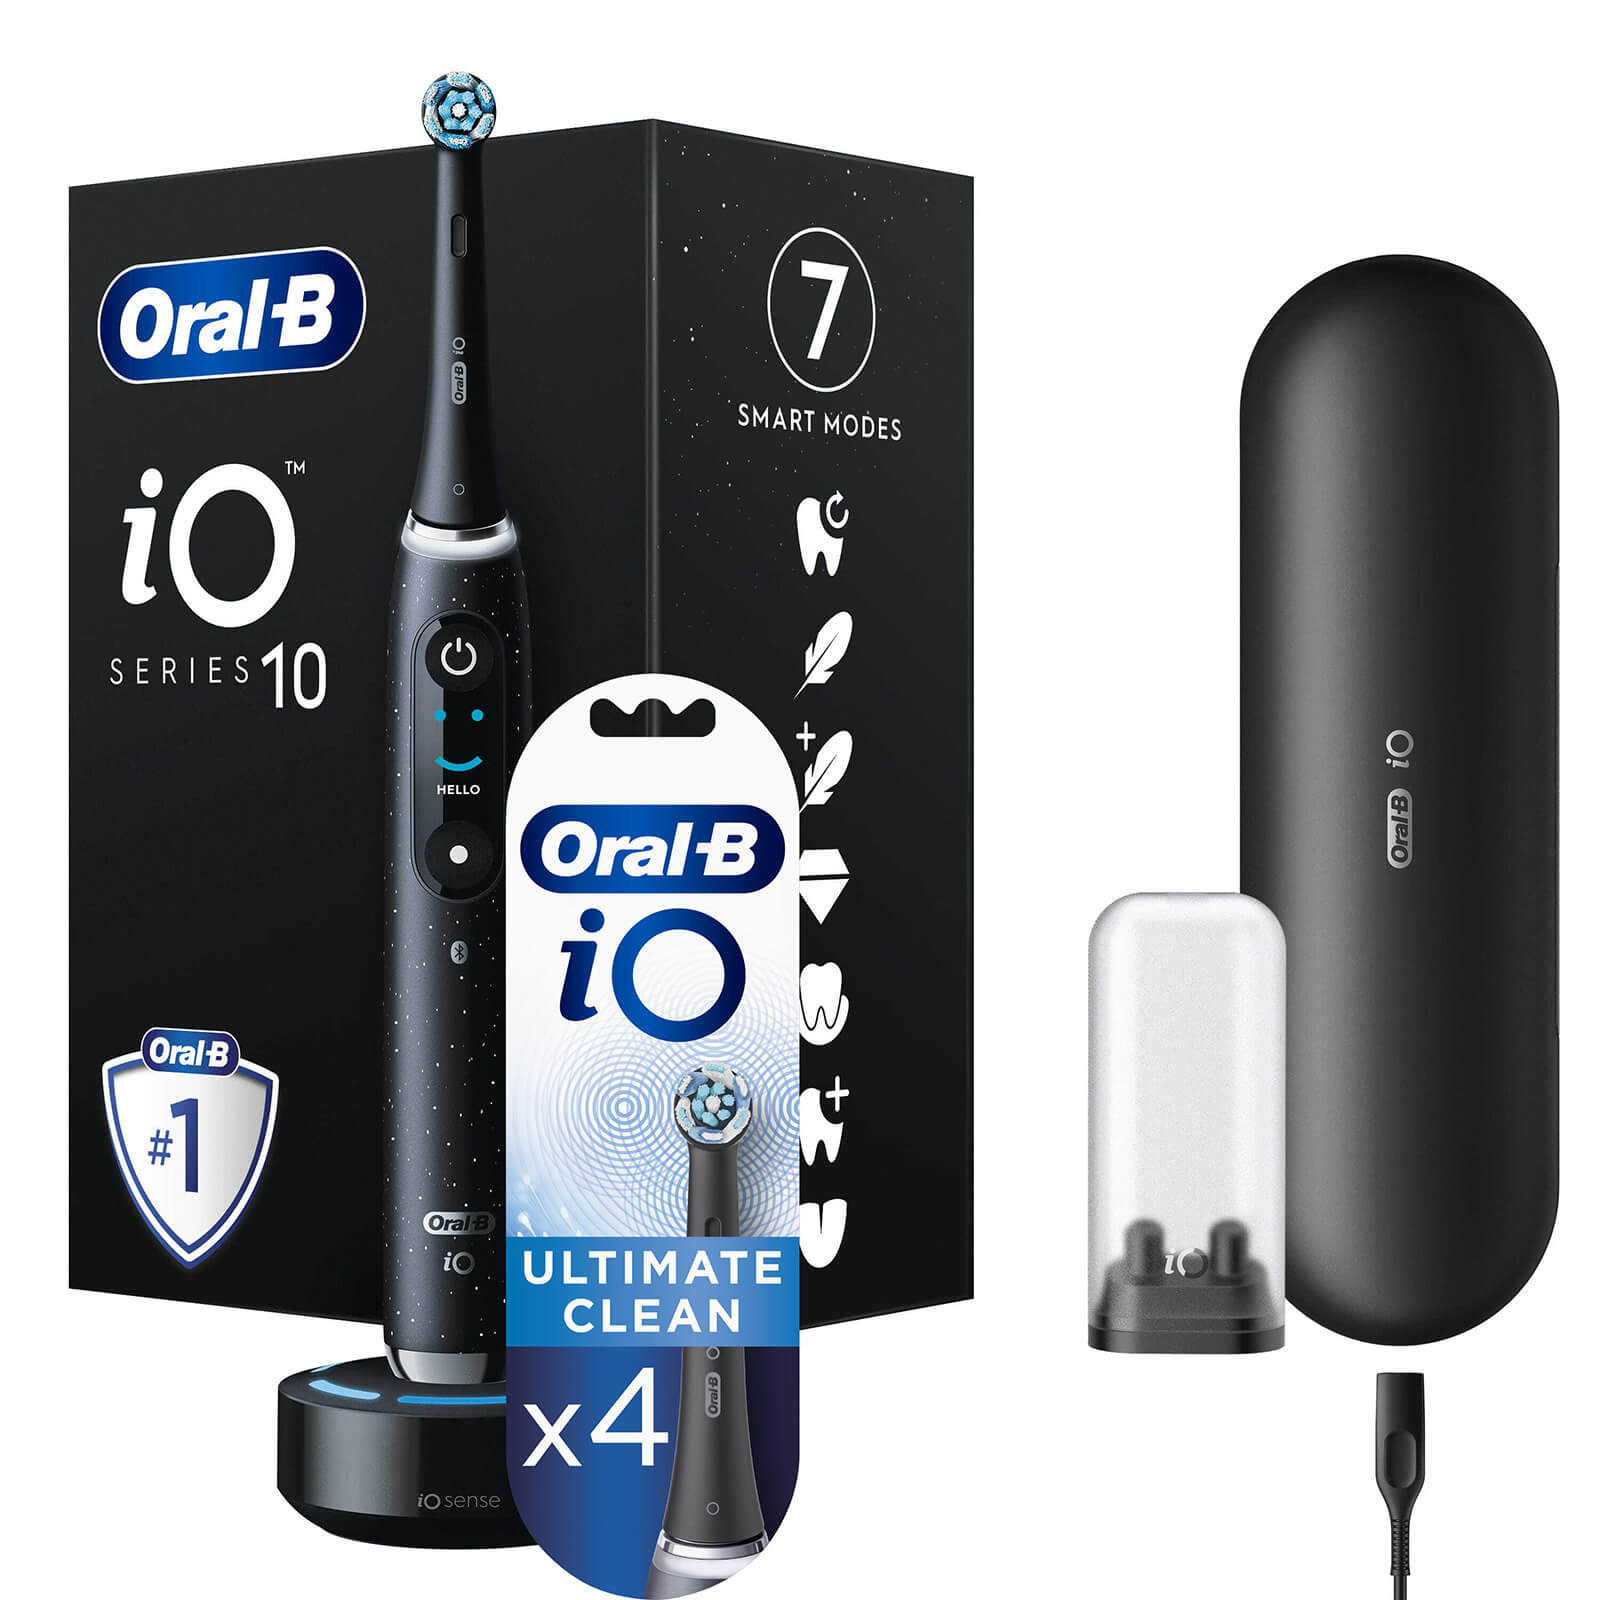 Oral-B iO10 Cosmic Black Electric Toothbrush with Charging Travel Case - Toothbrush + 8 Refills